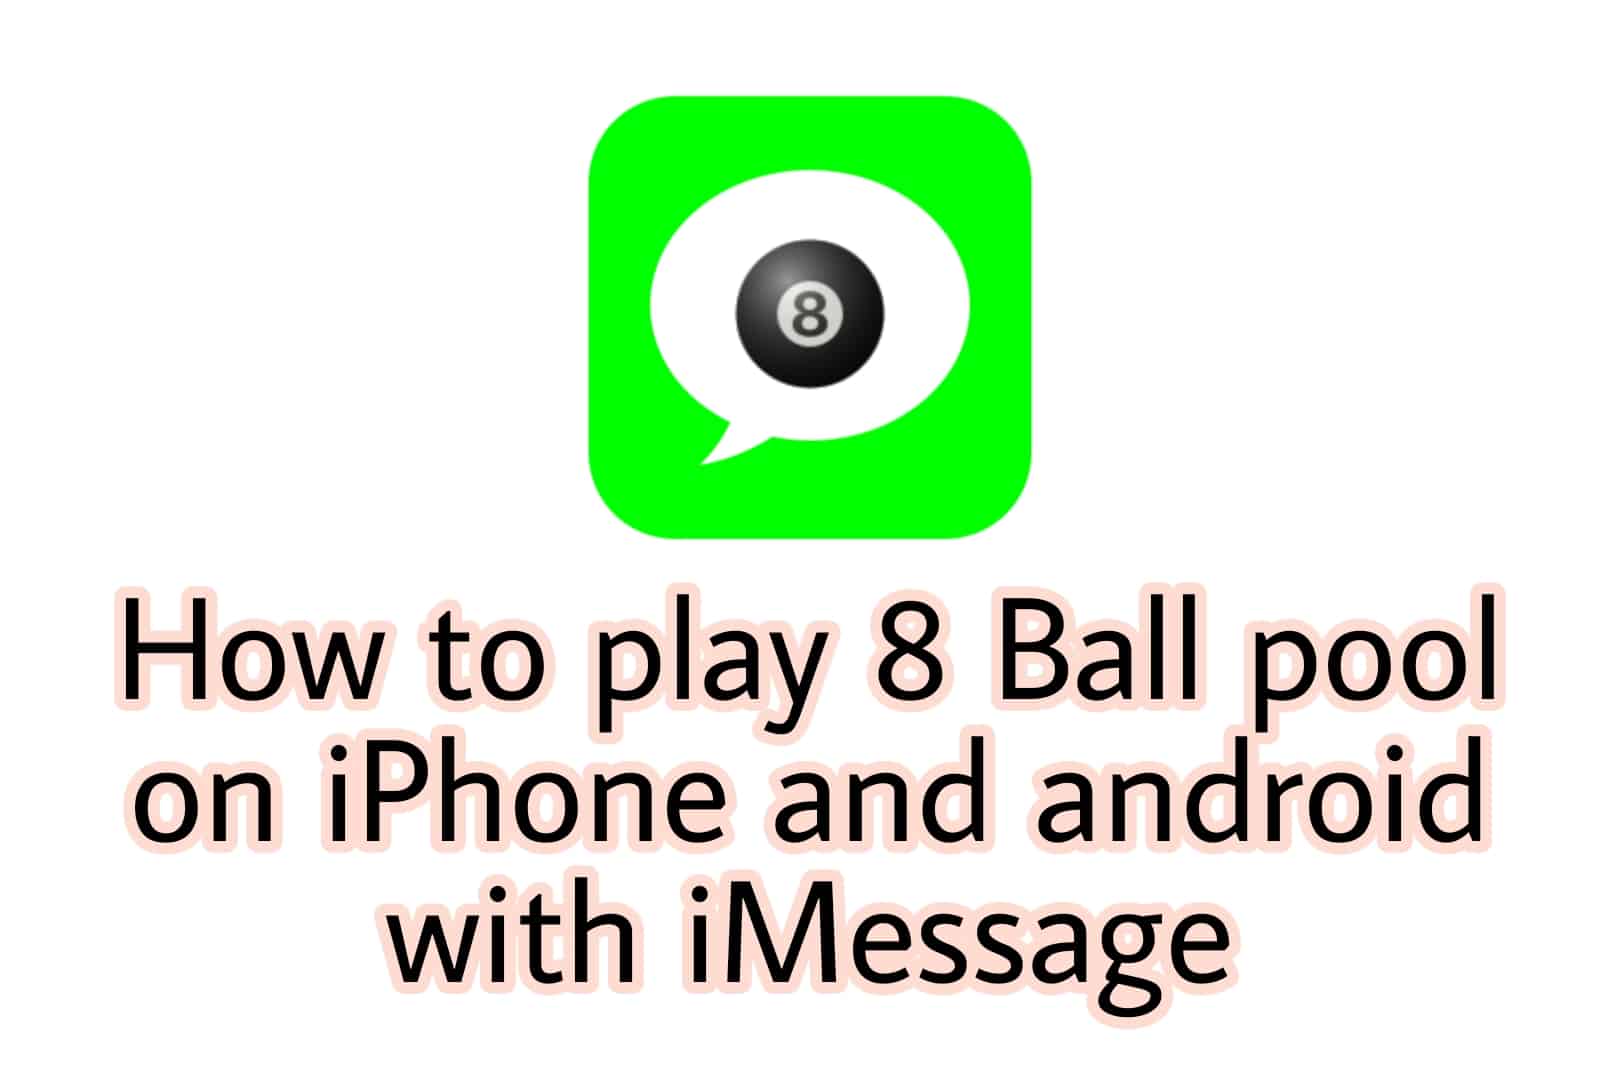 How to play 8 ball on iPhone & android with iMessage or Messenger